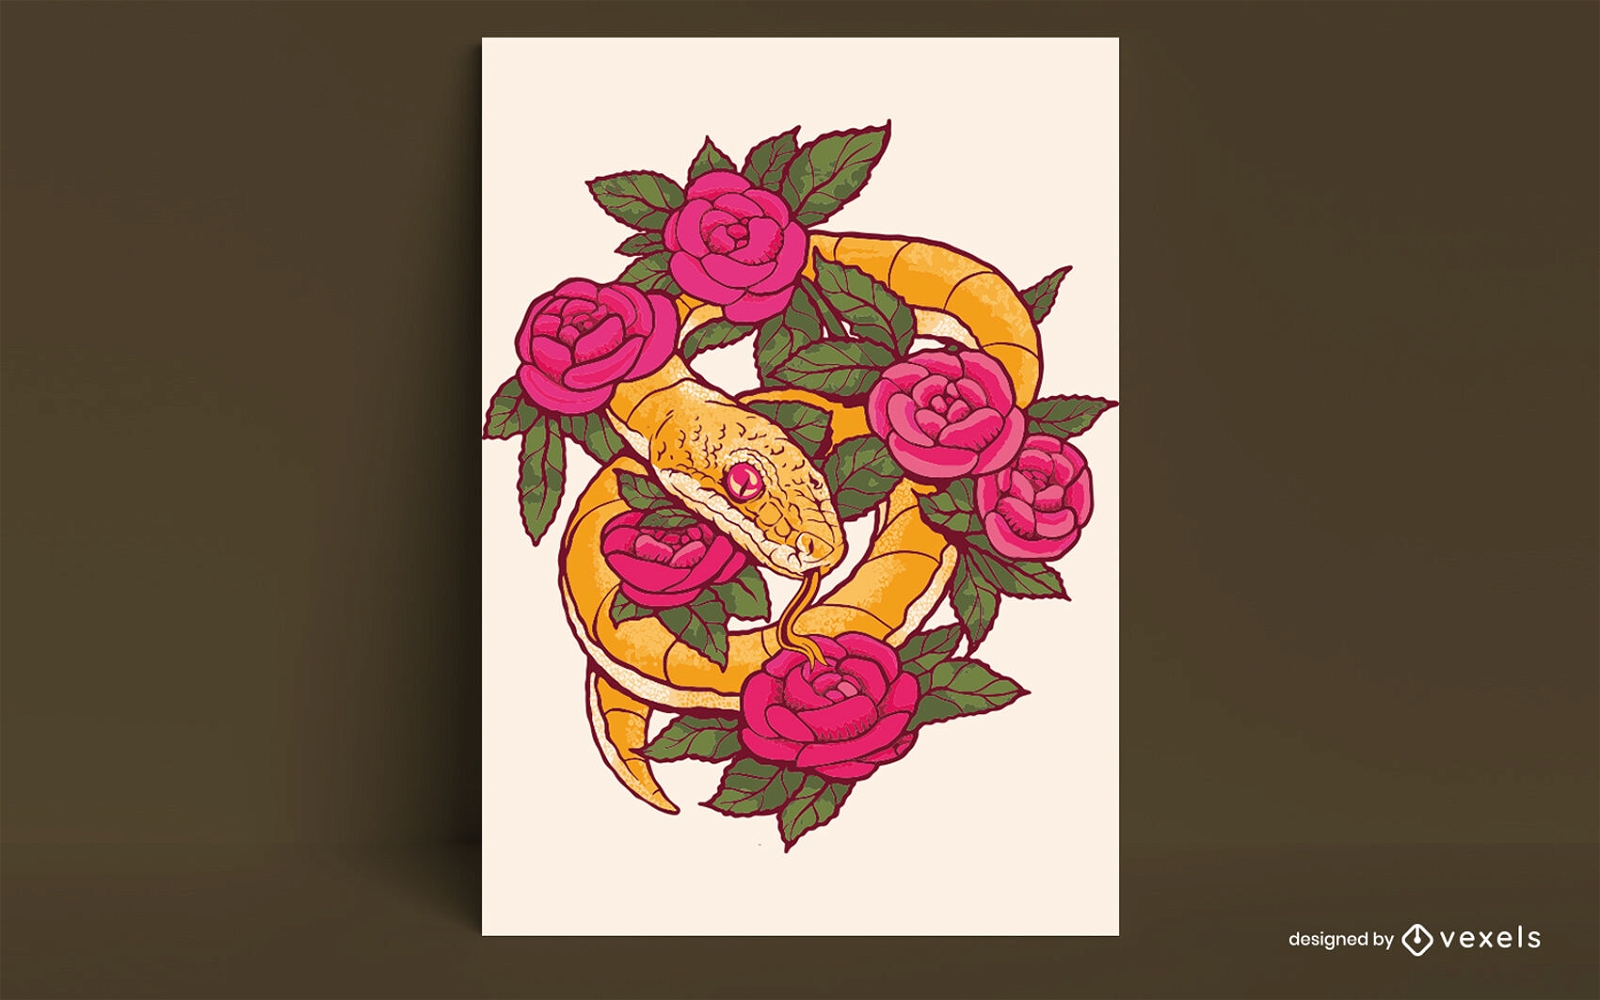 Snake and flowers tattoo poster design